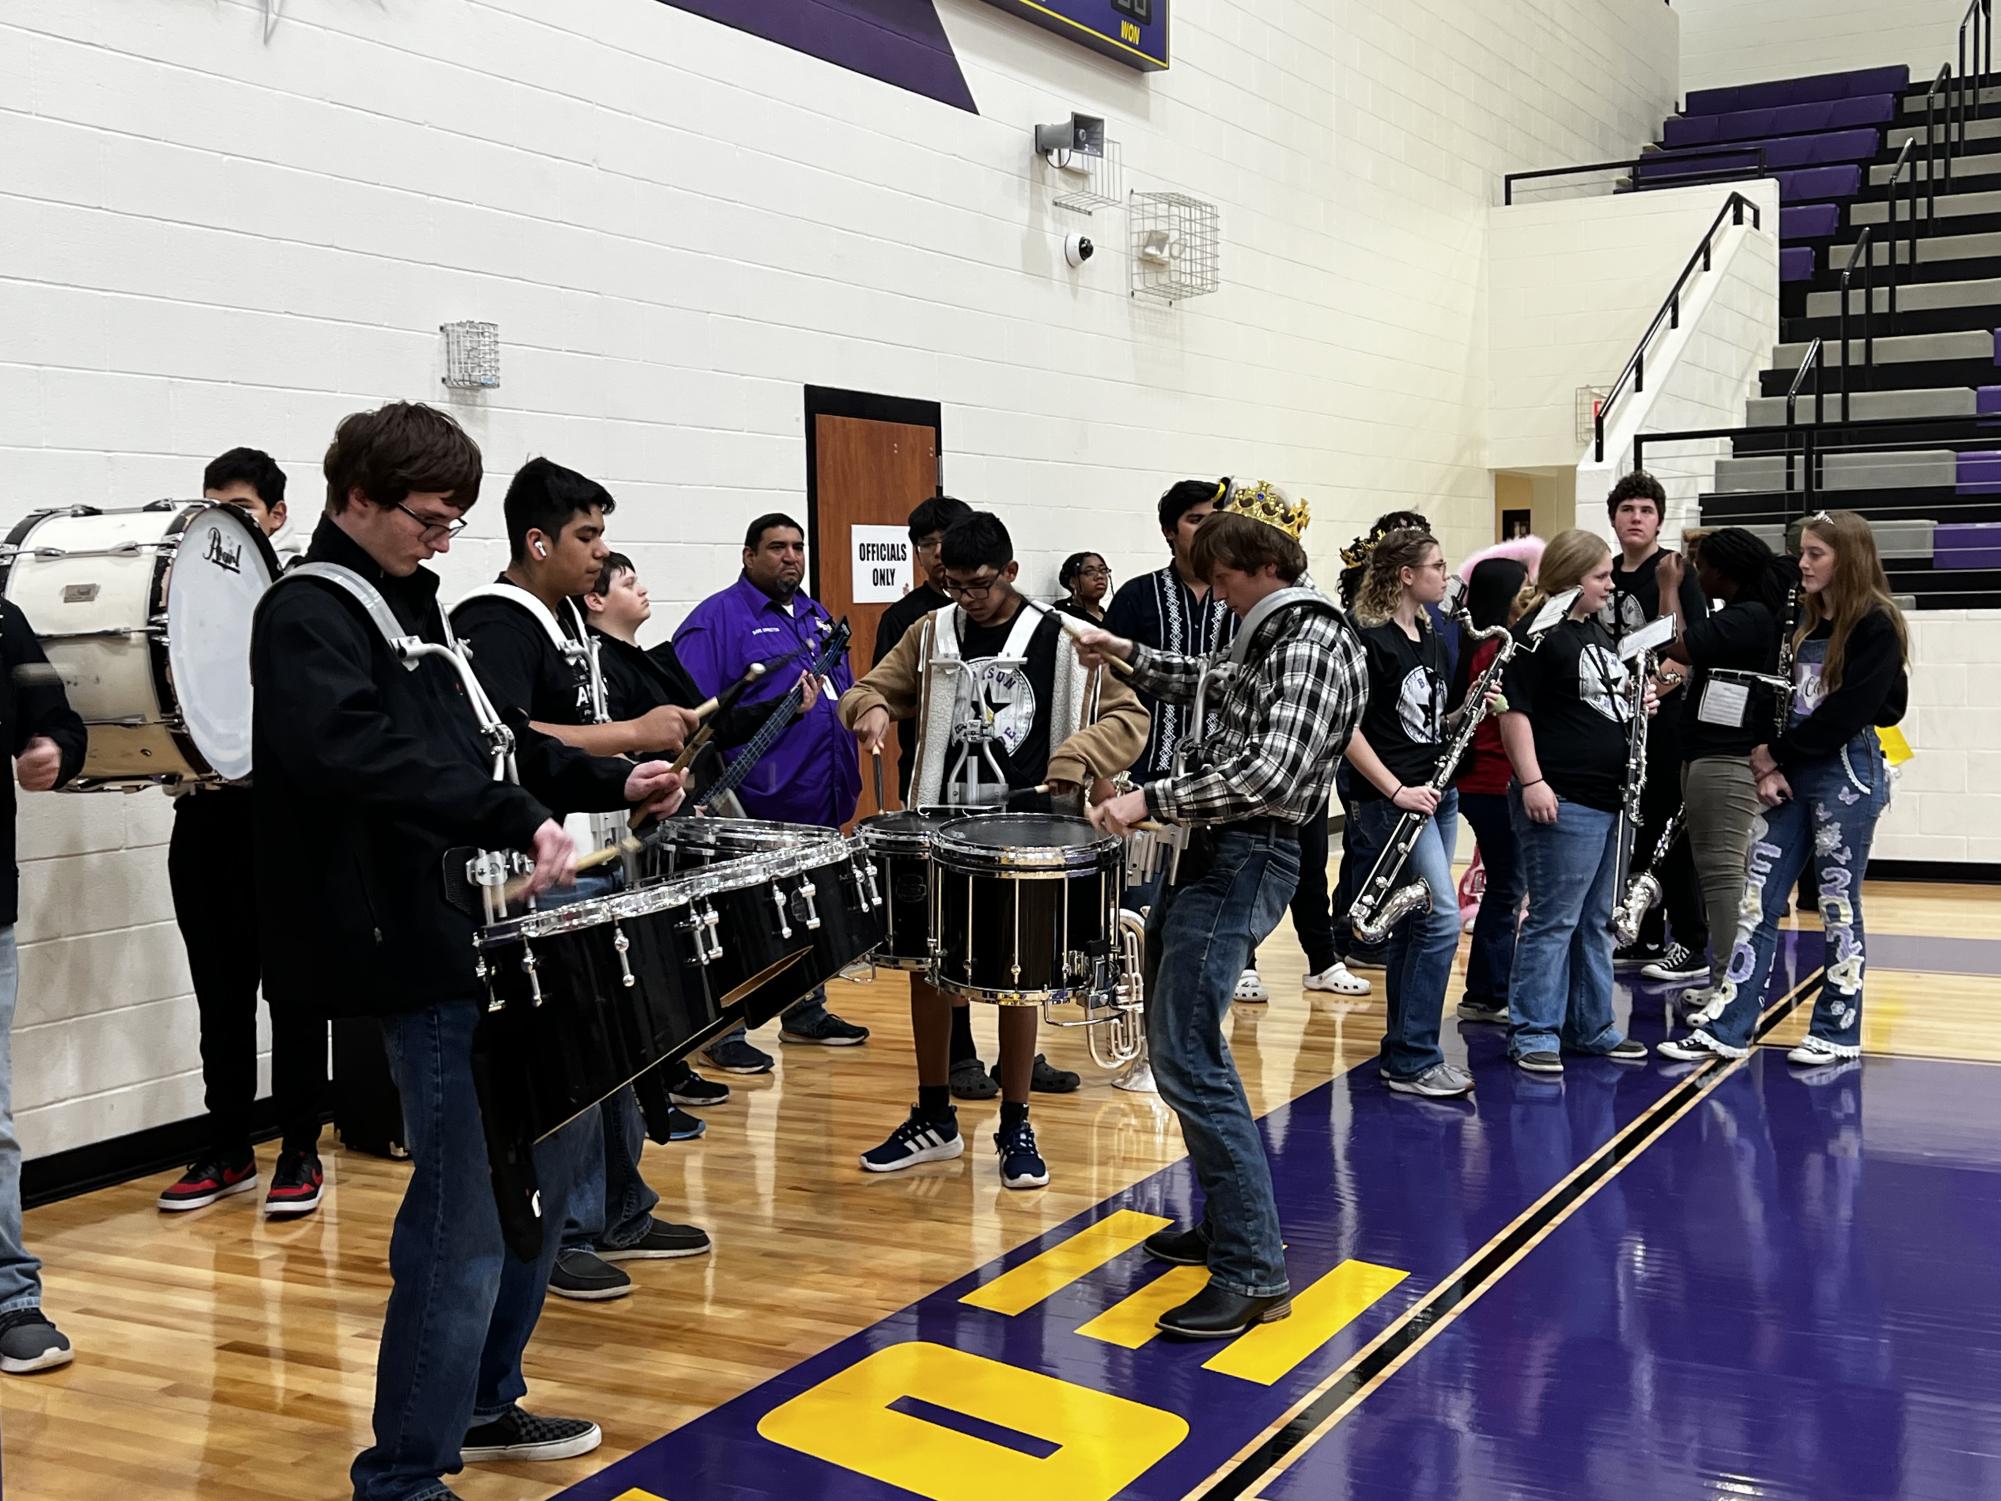 Senior Billy Duncan leads the drum line while the group waits for the senior pep rally to get started.